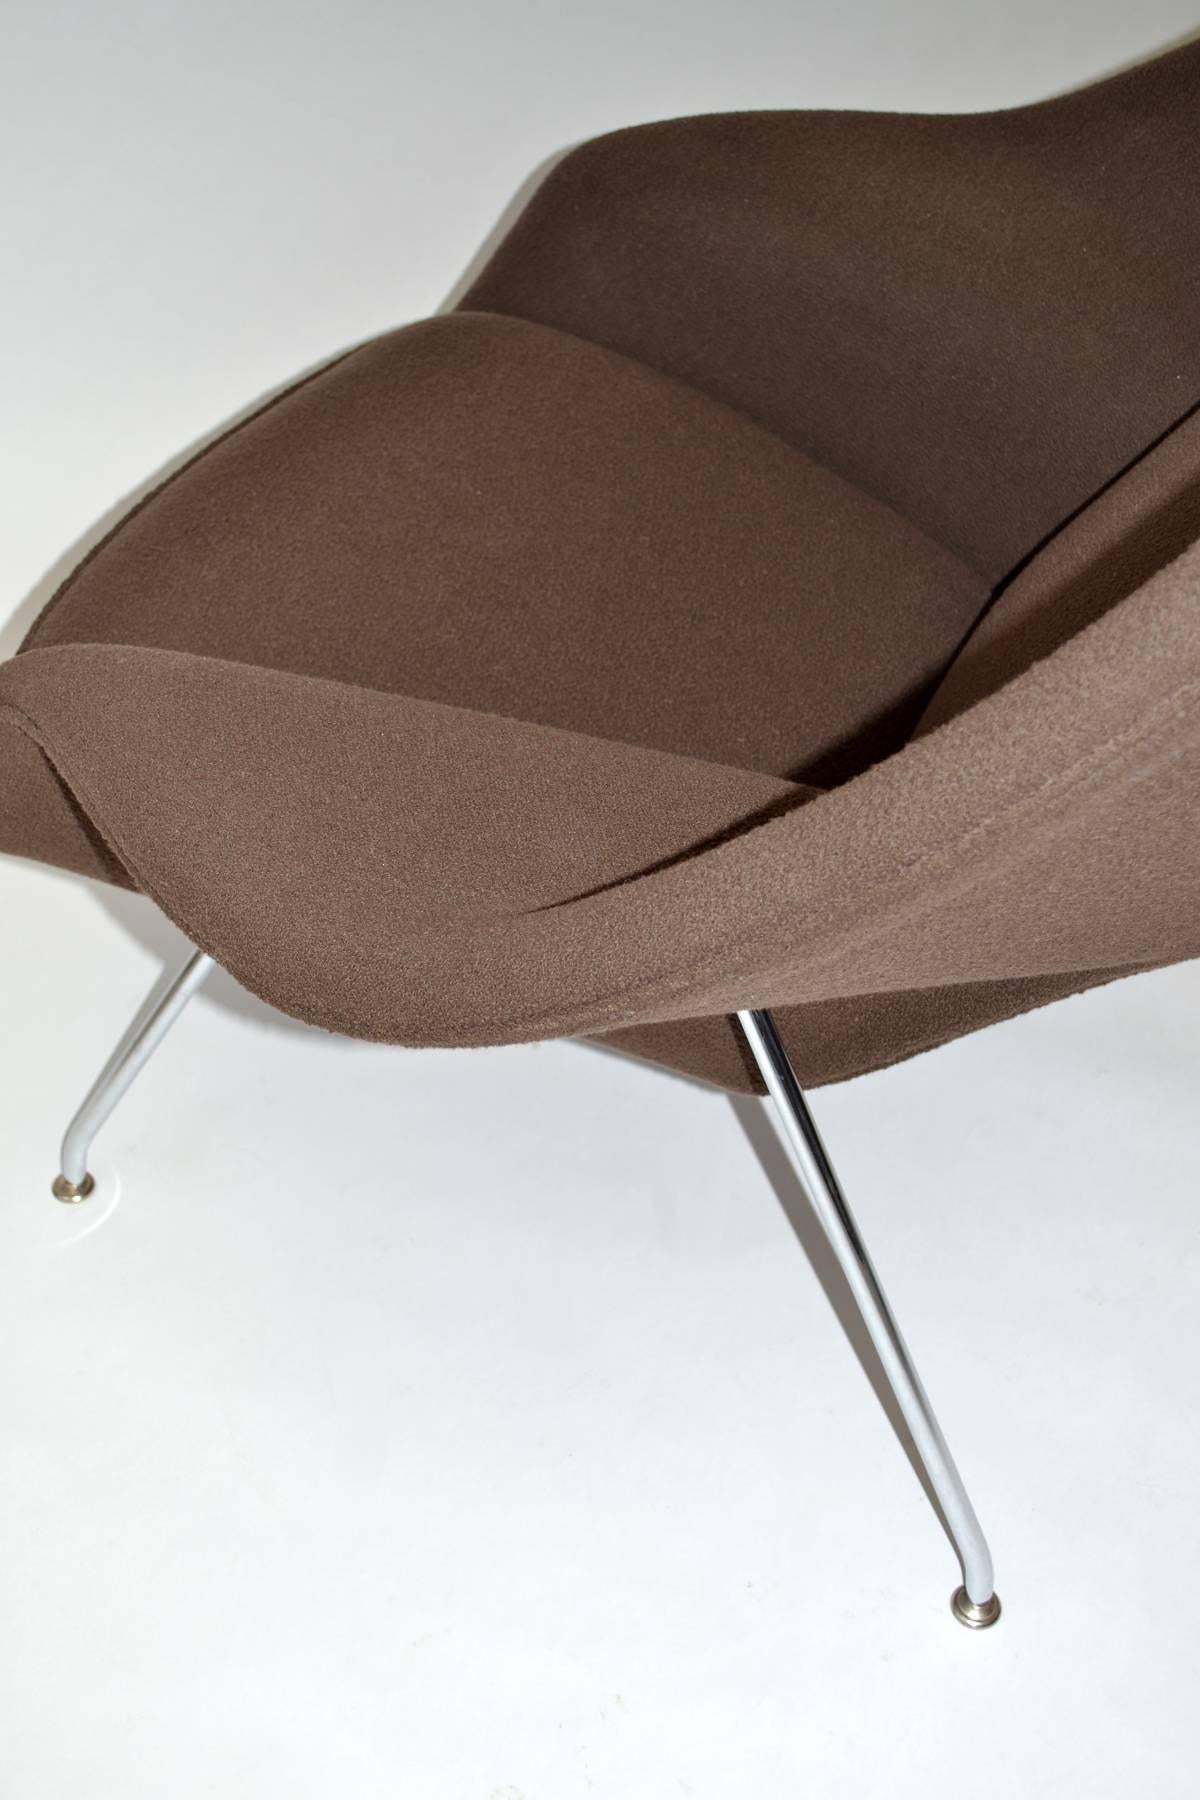 Eero Saarinen Womb Chair and Ottoman for Knoll In Excellent Condition In Ft Lauderdale, FL